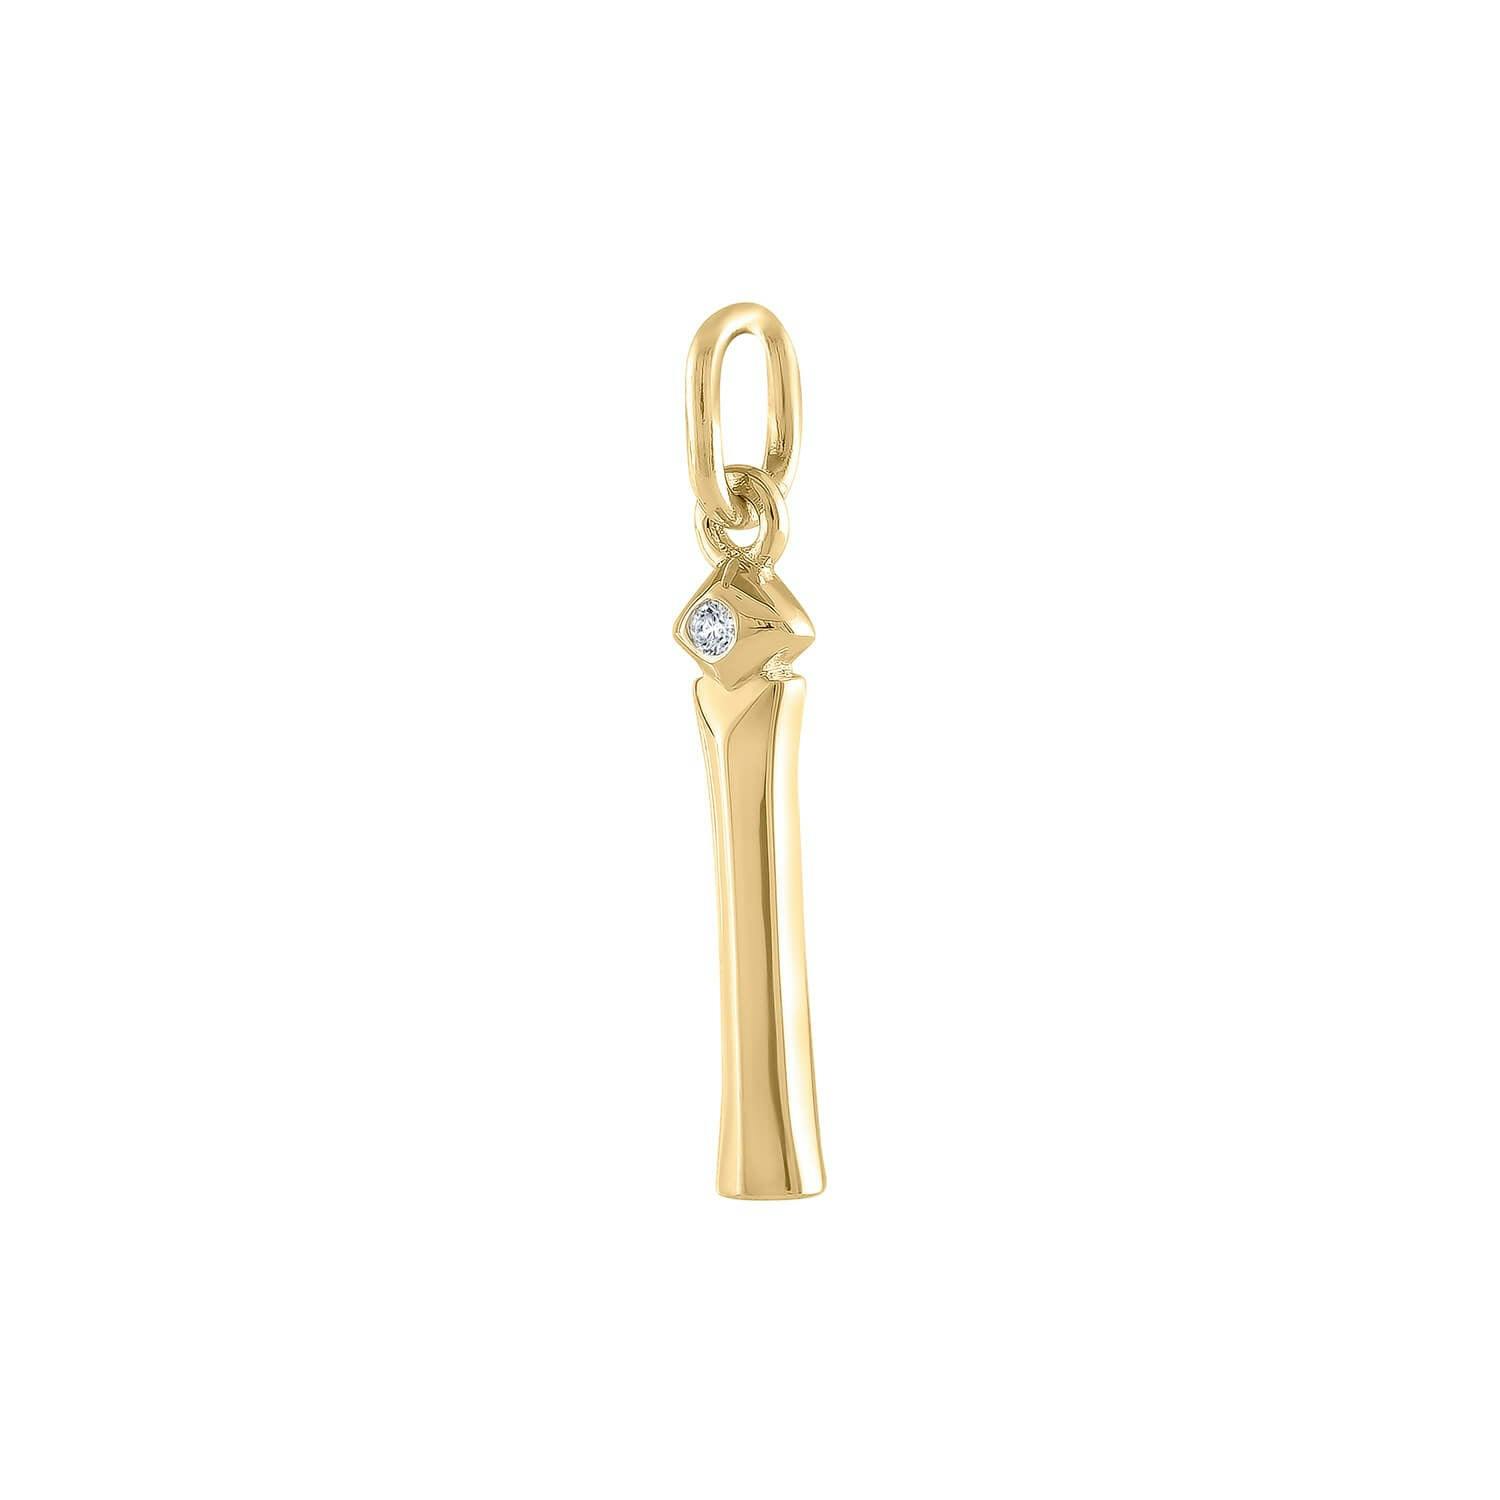 Initial Charm "I" in Gold Vermeil